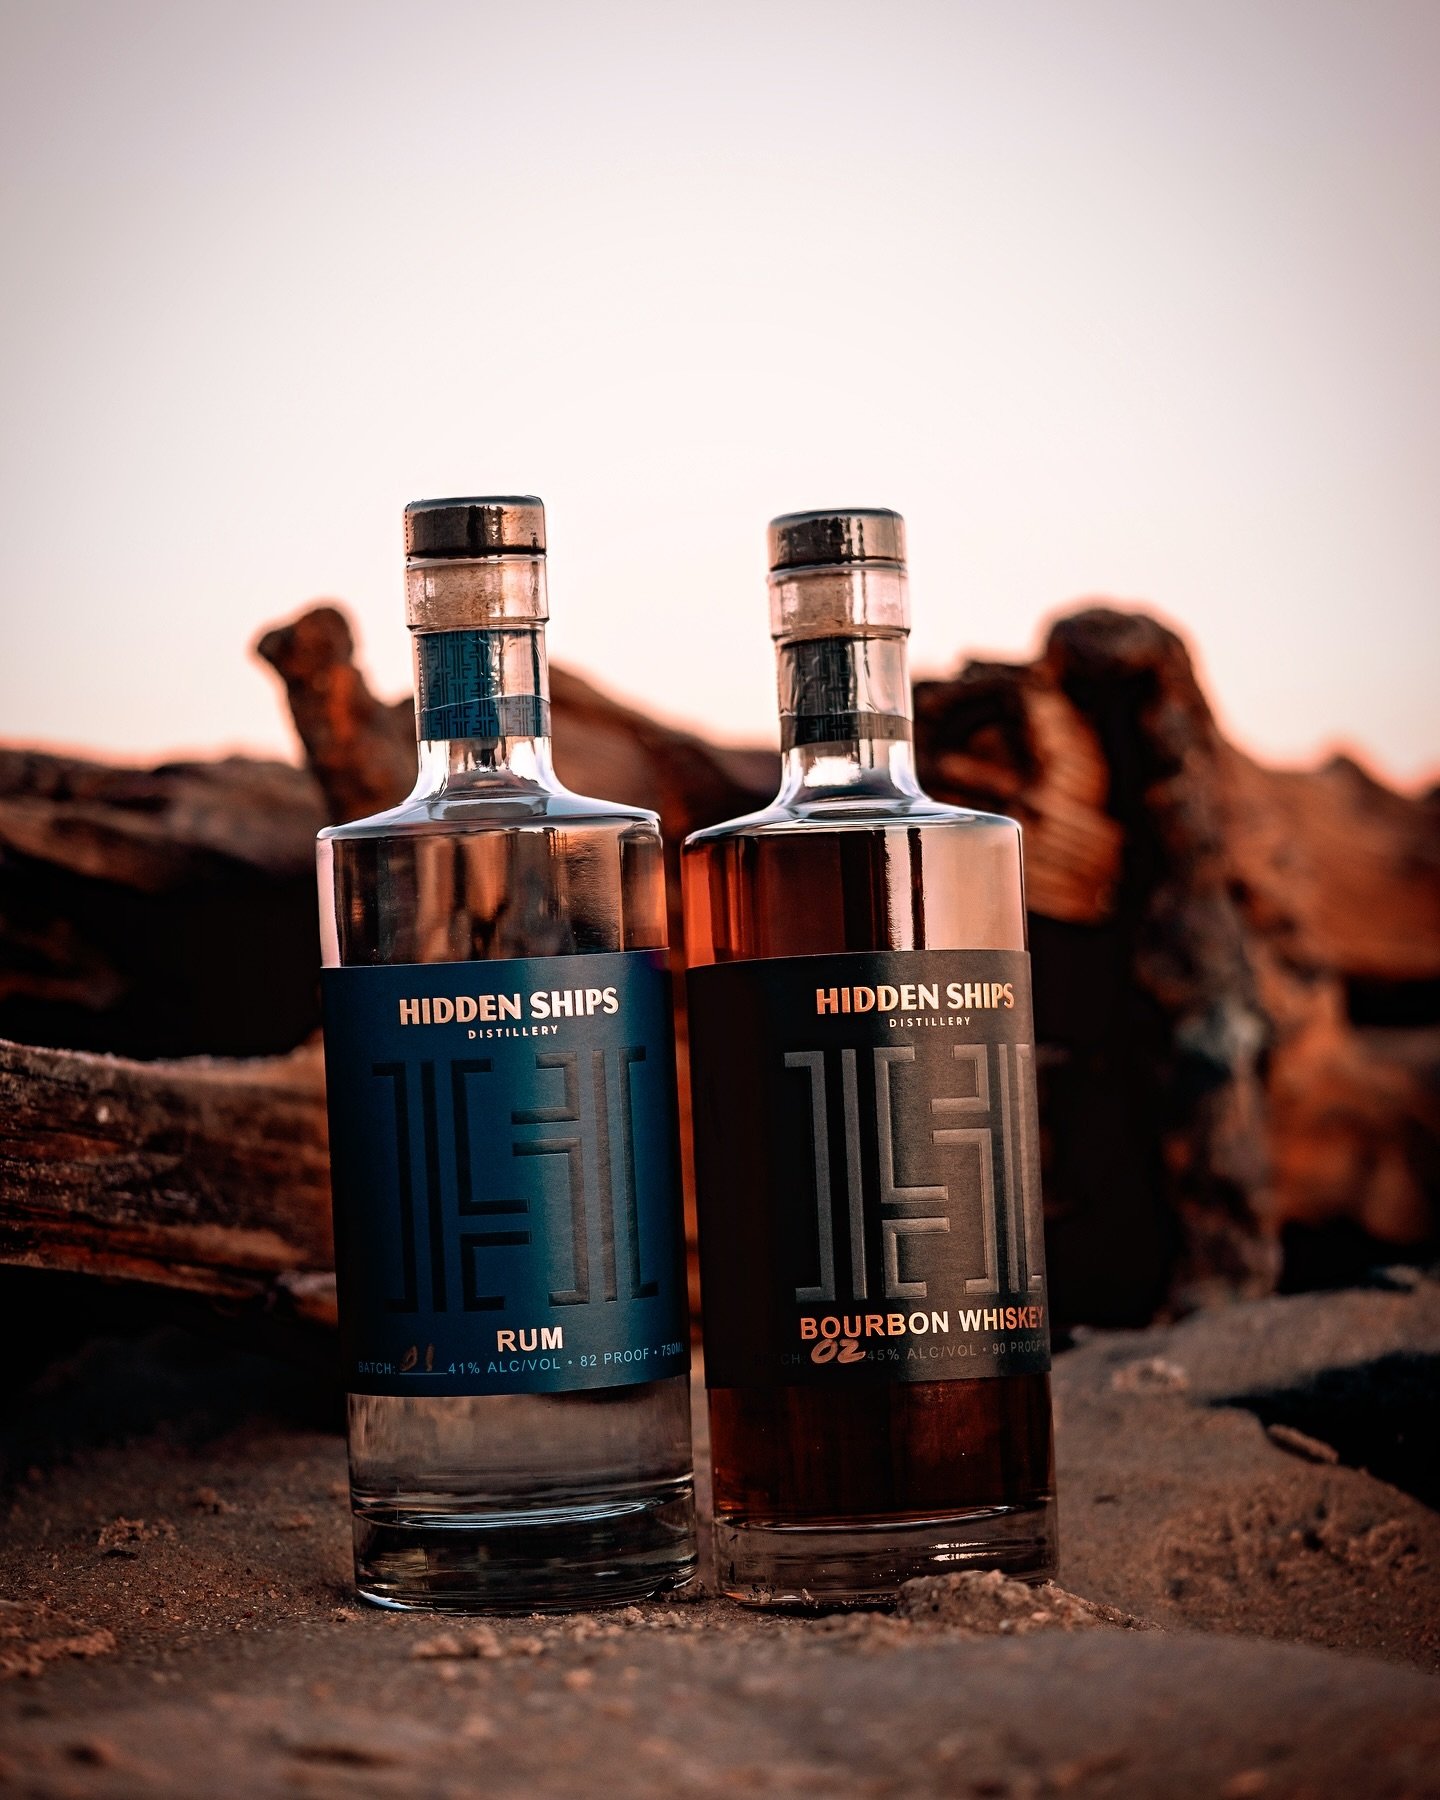 Distilled, Perfected, Bottled, and sold right here in Topsail. 

Don&rsquo;t forget to sign up for your tour &amp; tasting on our website:

www.hiddenships.com